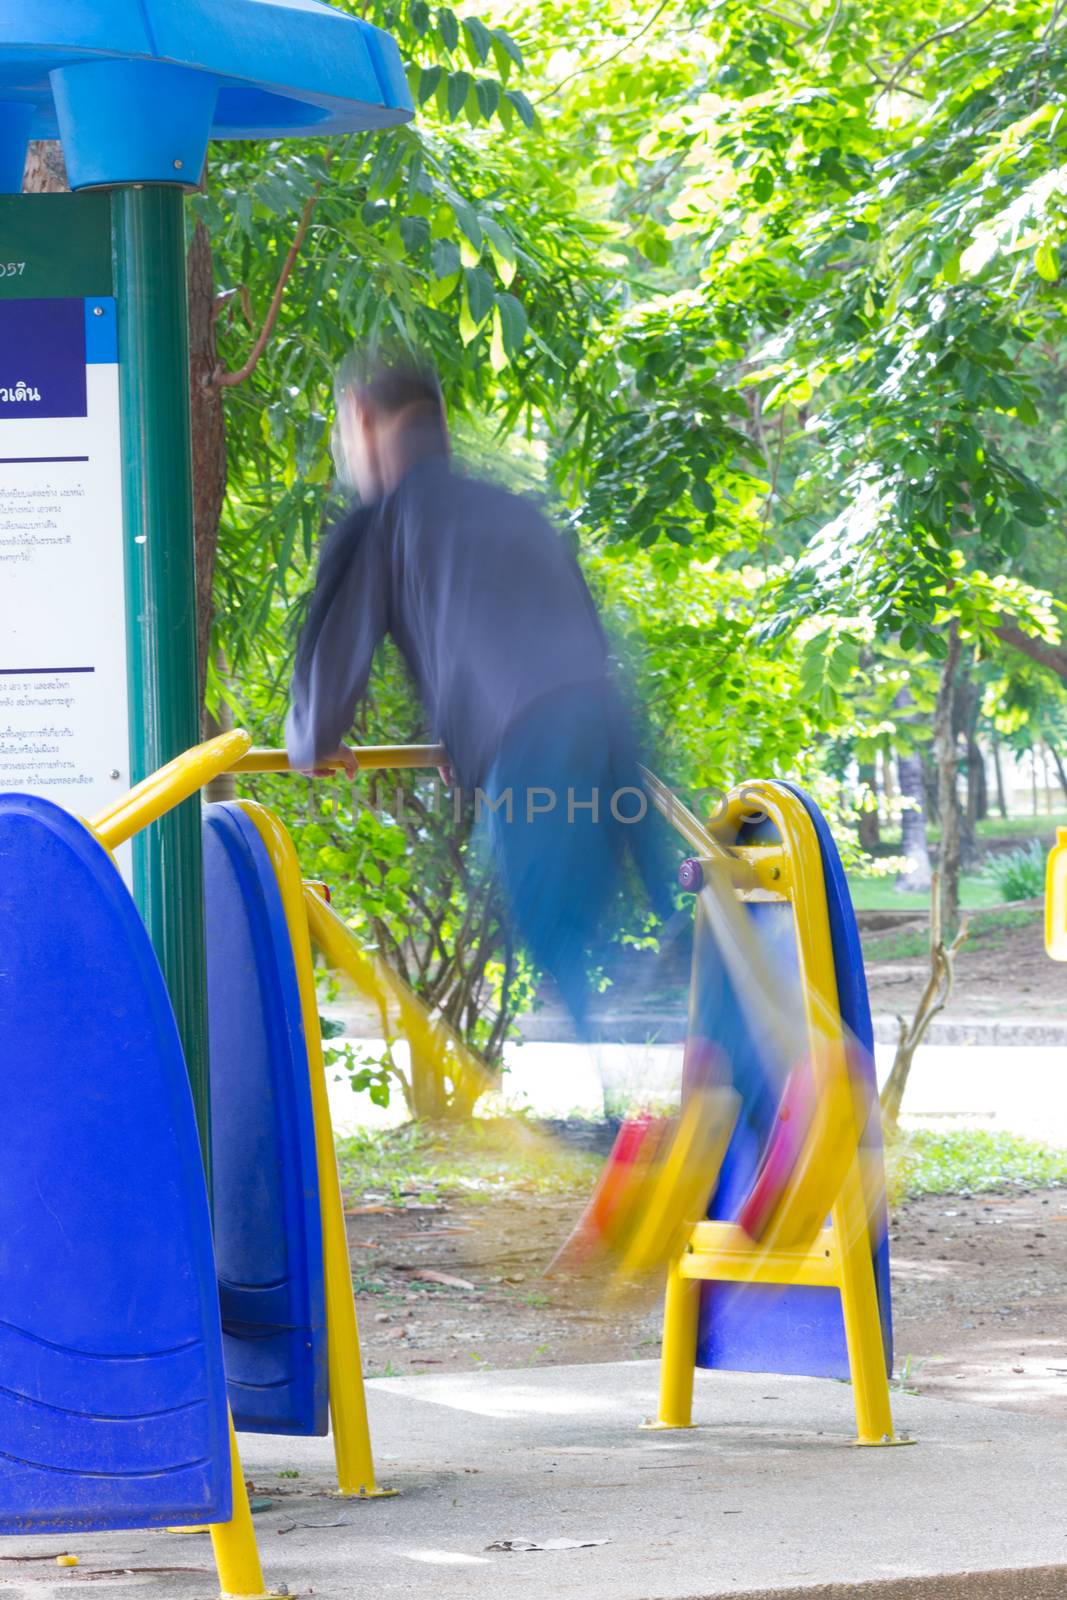 Blurred image of a man exercising on equipment in a park in Thai by a3701027